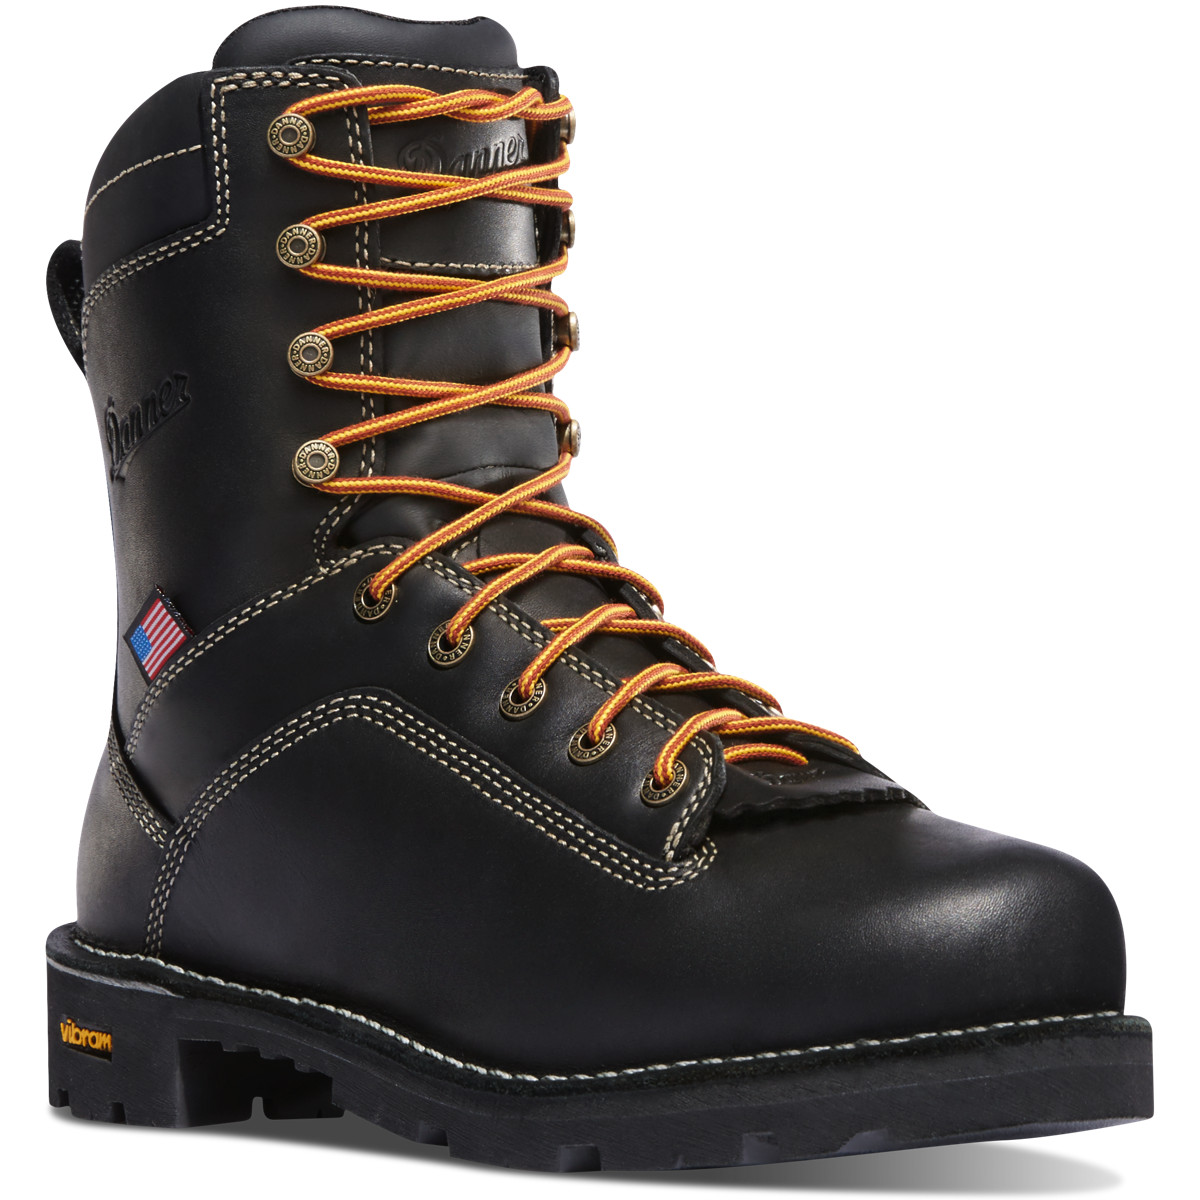 Men's boot - click or tap to browse Men's footwear at Coastal